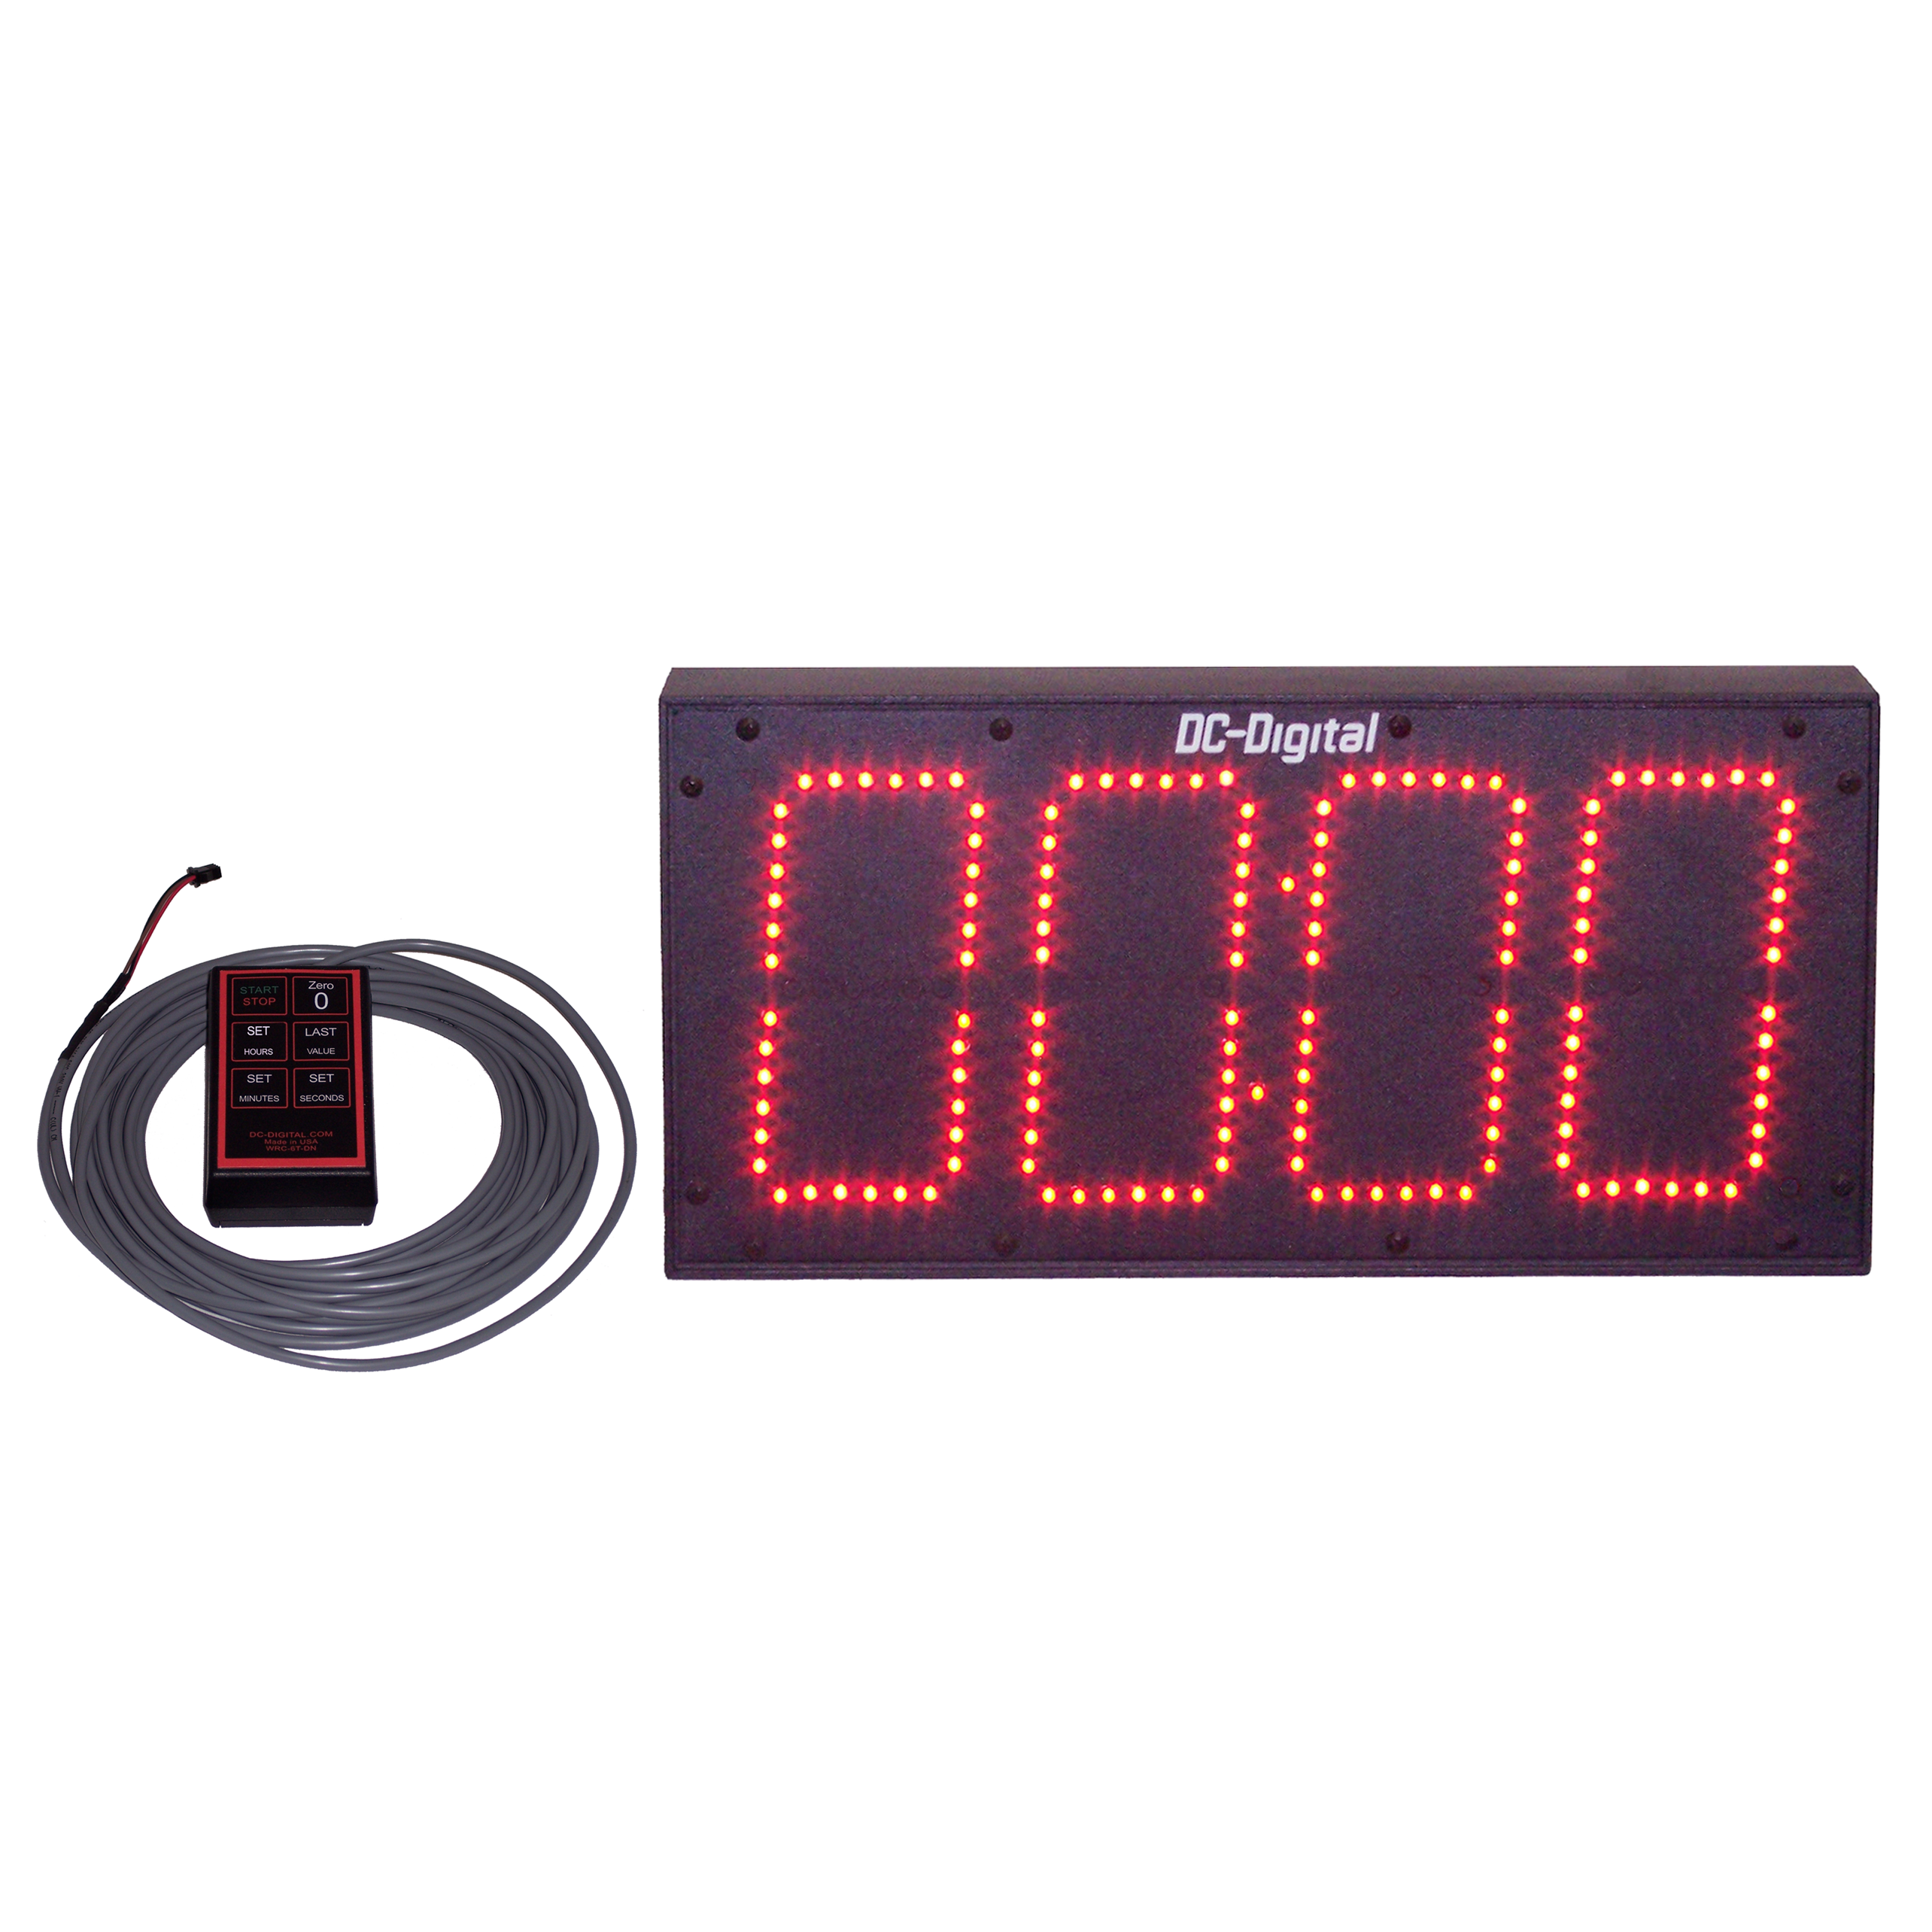 (DC-60T-DN-WR-IN) 6.0 Inch LED, Wired Remote Controlled, Digital Countdown Timer (INDOOR)